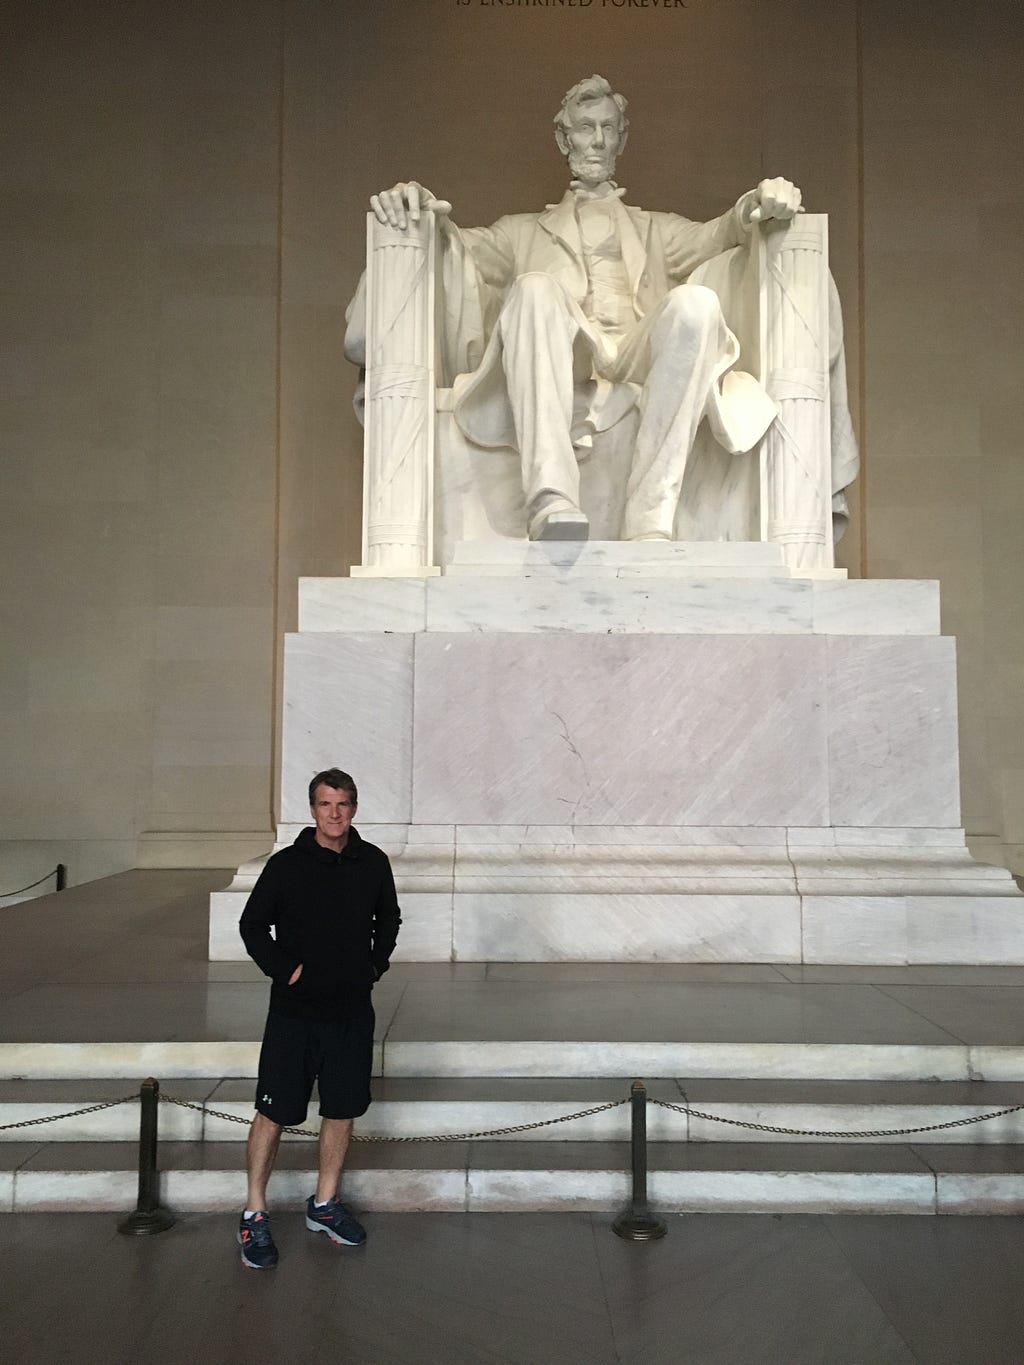 This picture is myself (author) standing in front of Abraham Lincoln’s statue at the Lincoln Memorial in Washington D.C.